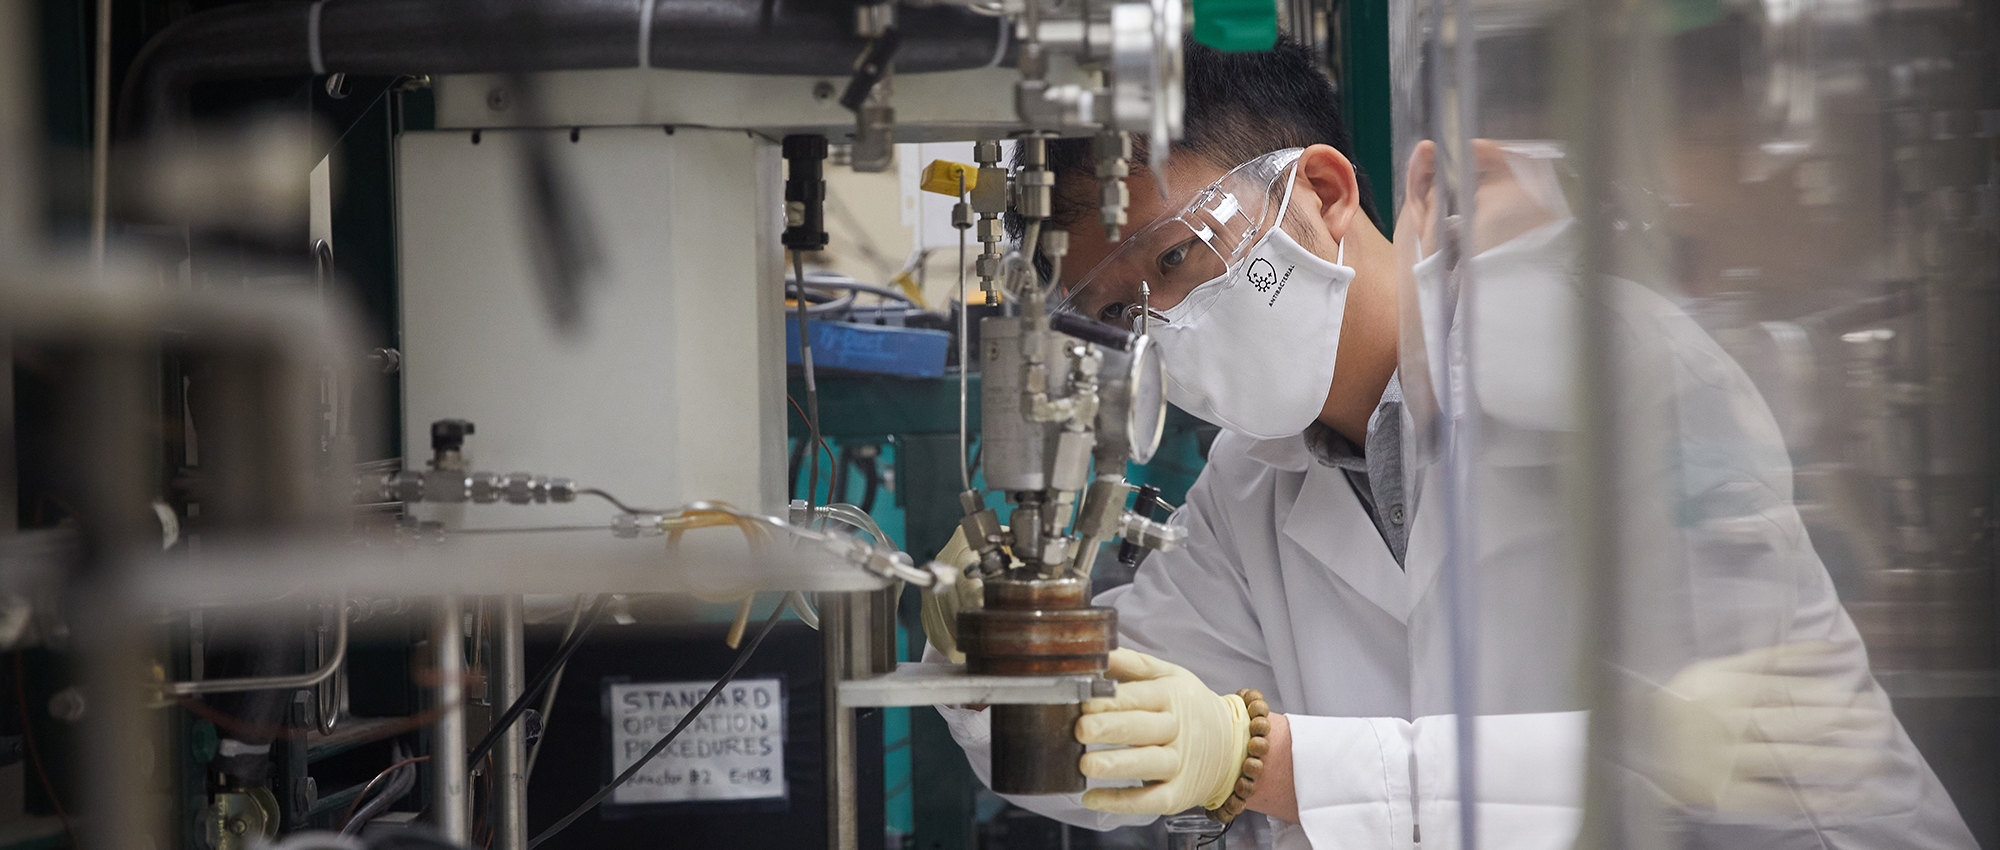 An OU researcher wearing safety googles and a mask works with laboratory equipment.